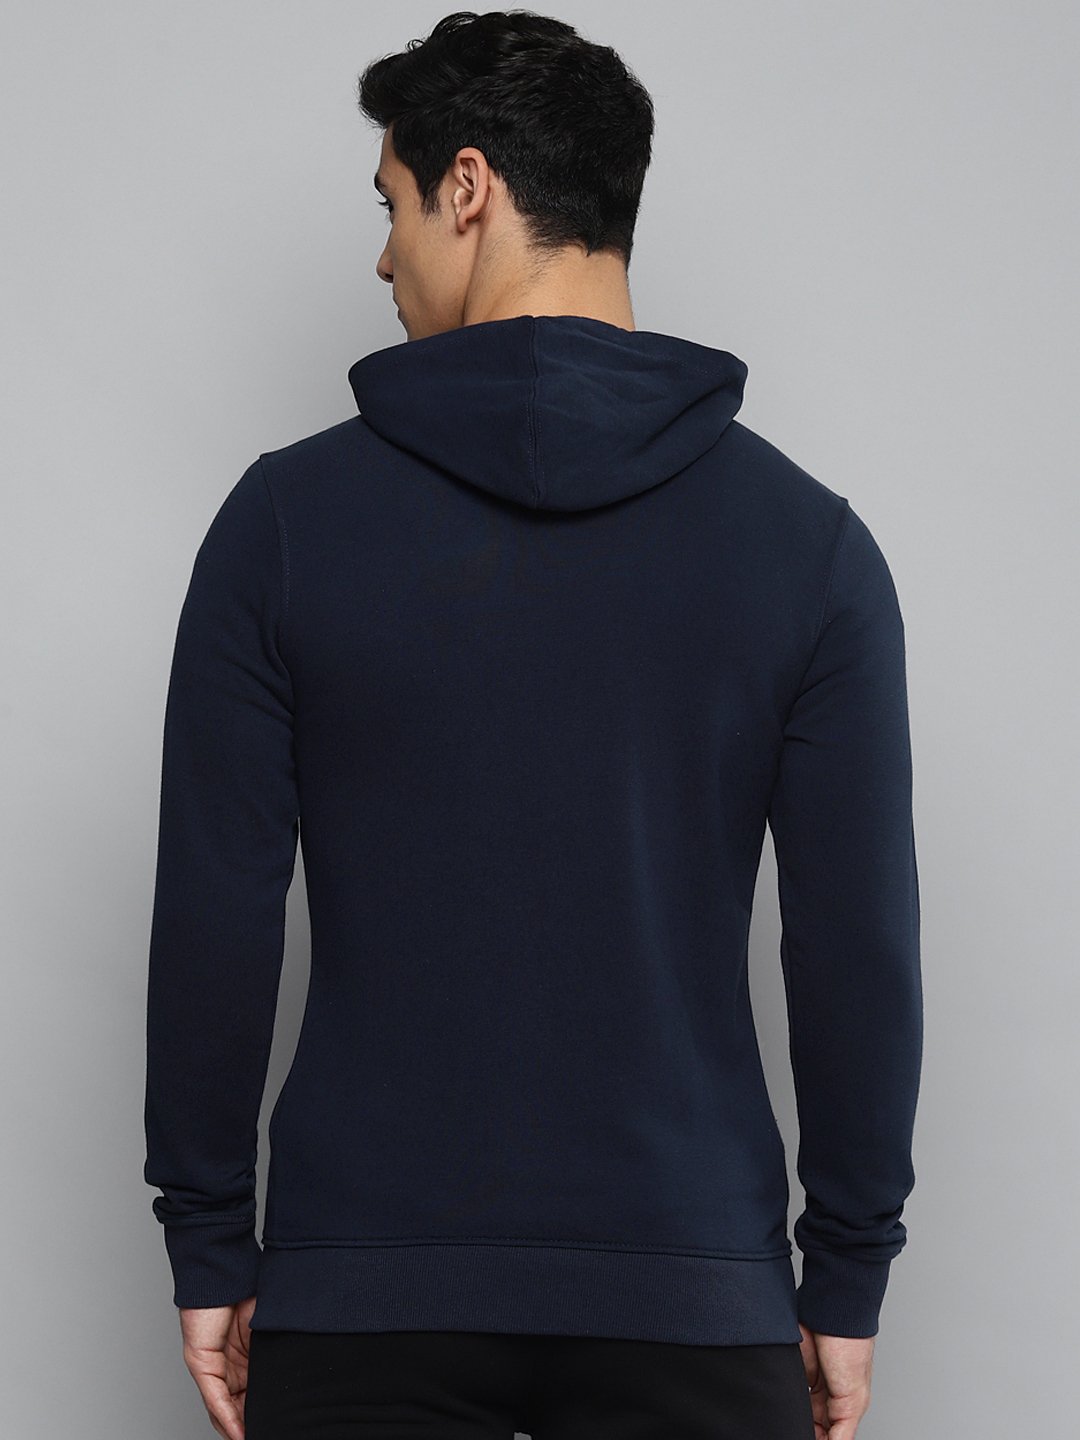 Alcis Men Navy Blue Solid Hooded Sweatshirt with Printed Details